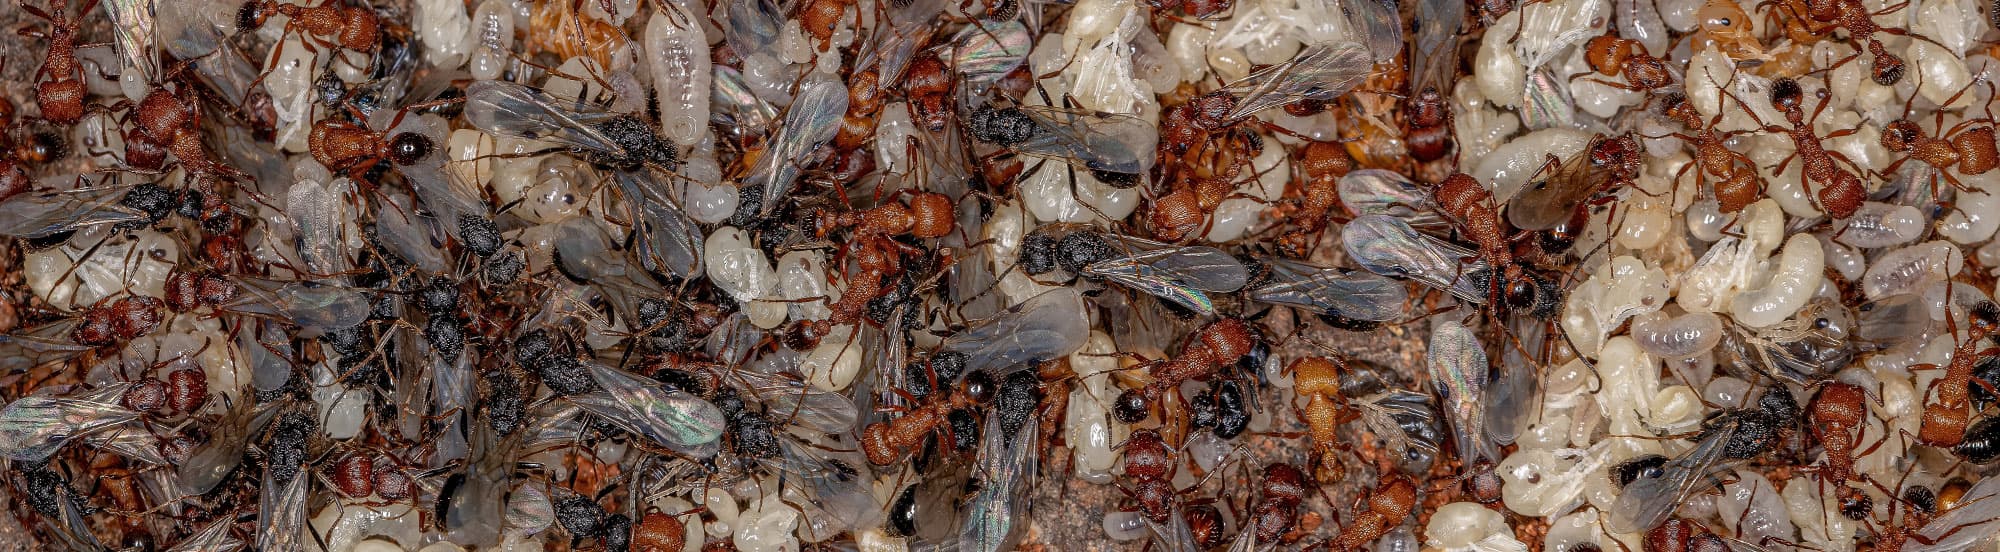 harvester ant workers and swarmers